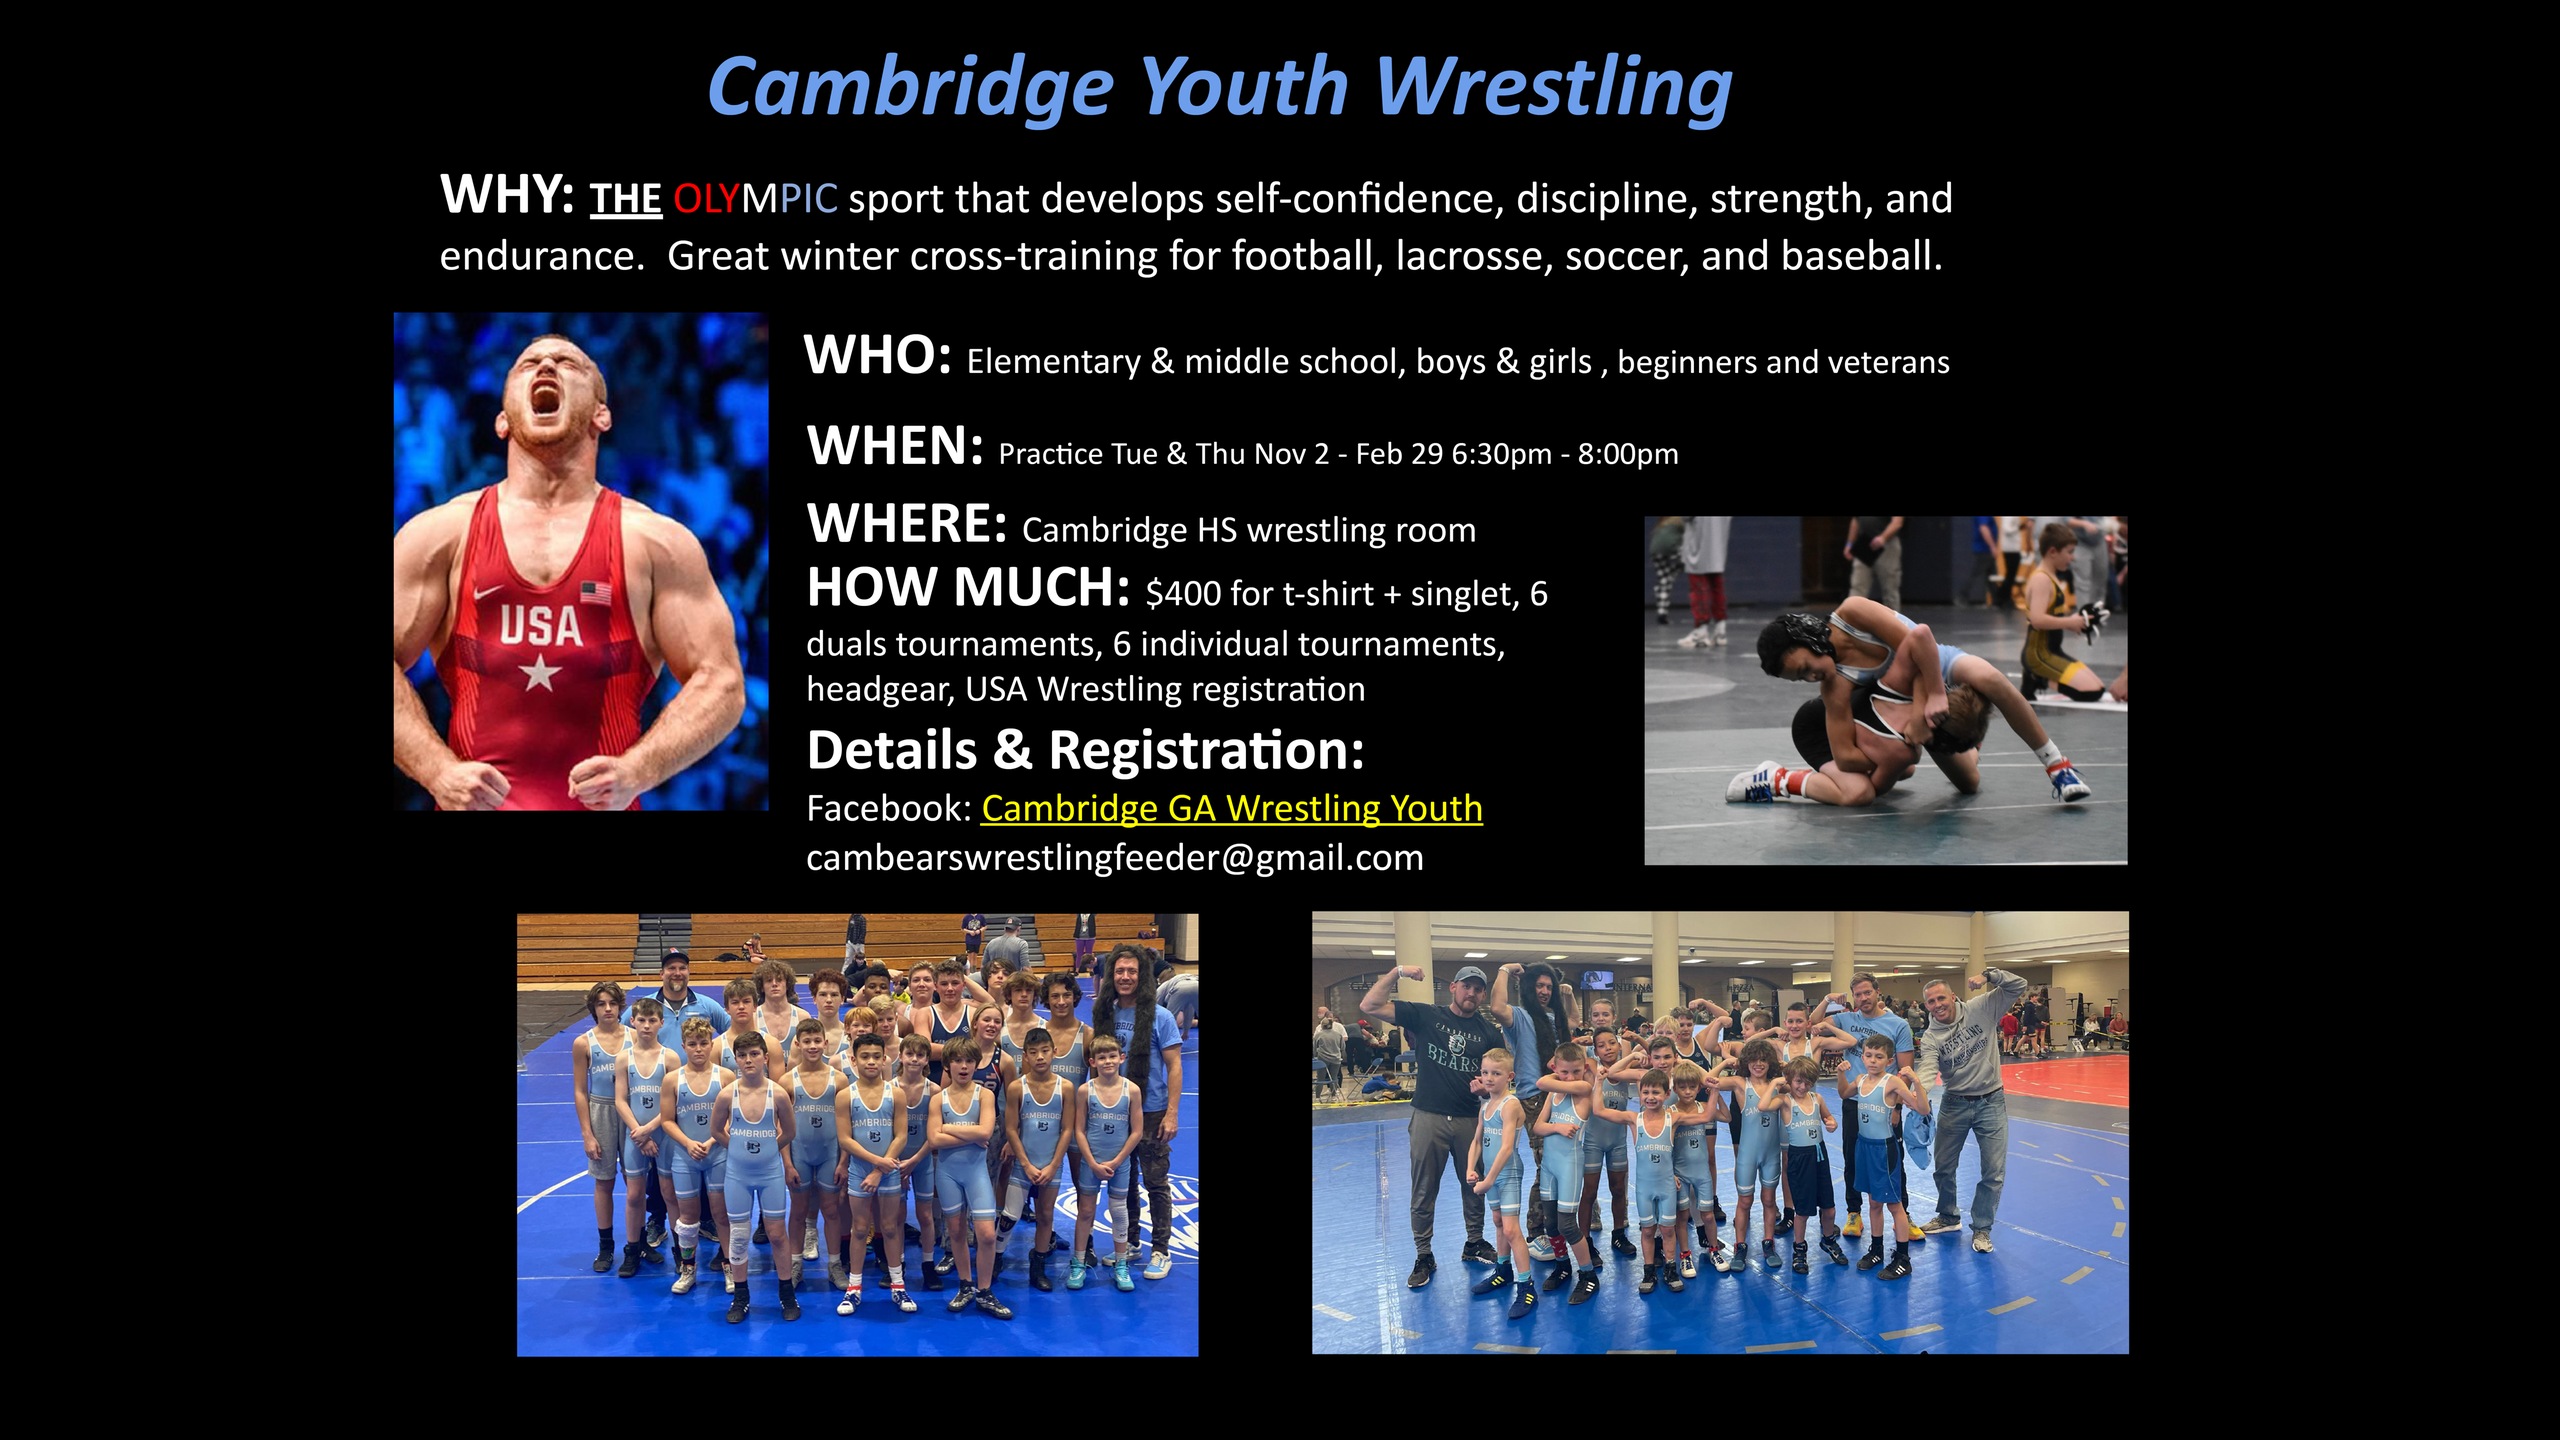 Sign Up for Cambridge Youth Wrestling 11/2 - 2/29